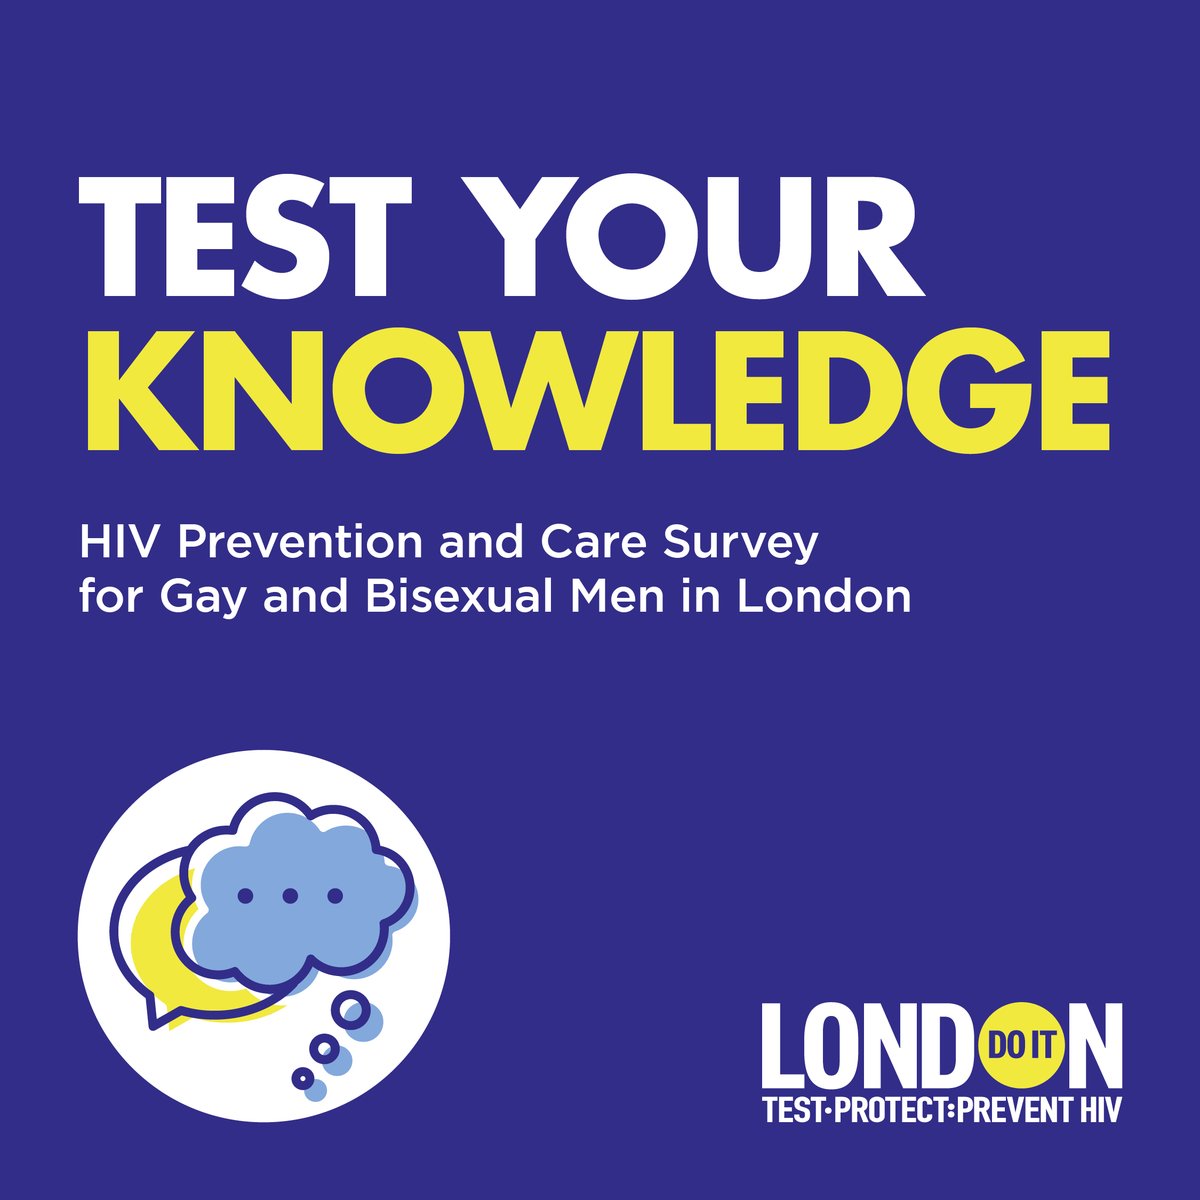 Are you a gay or bisexual man living in London? Take our survey and test your knowledge of HIV testing and related sexual health issues! It’s quick and anonymous to complete: bit.ly/3NXfqE2 @2BrewersClapham @METROCharity @Halfway2_Heaven